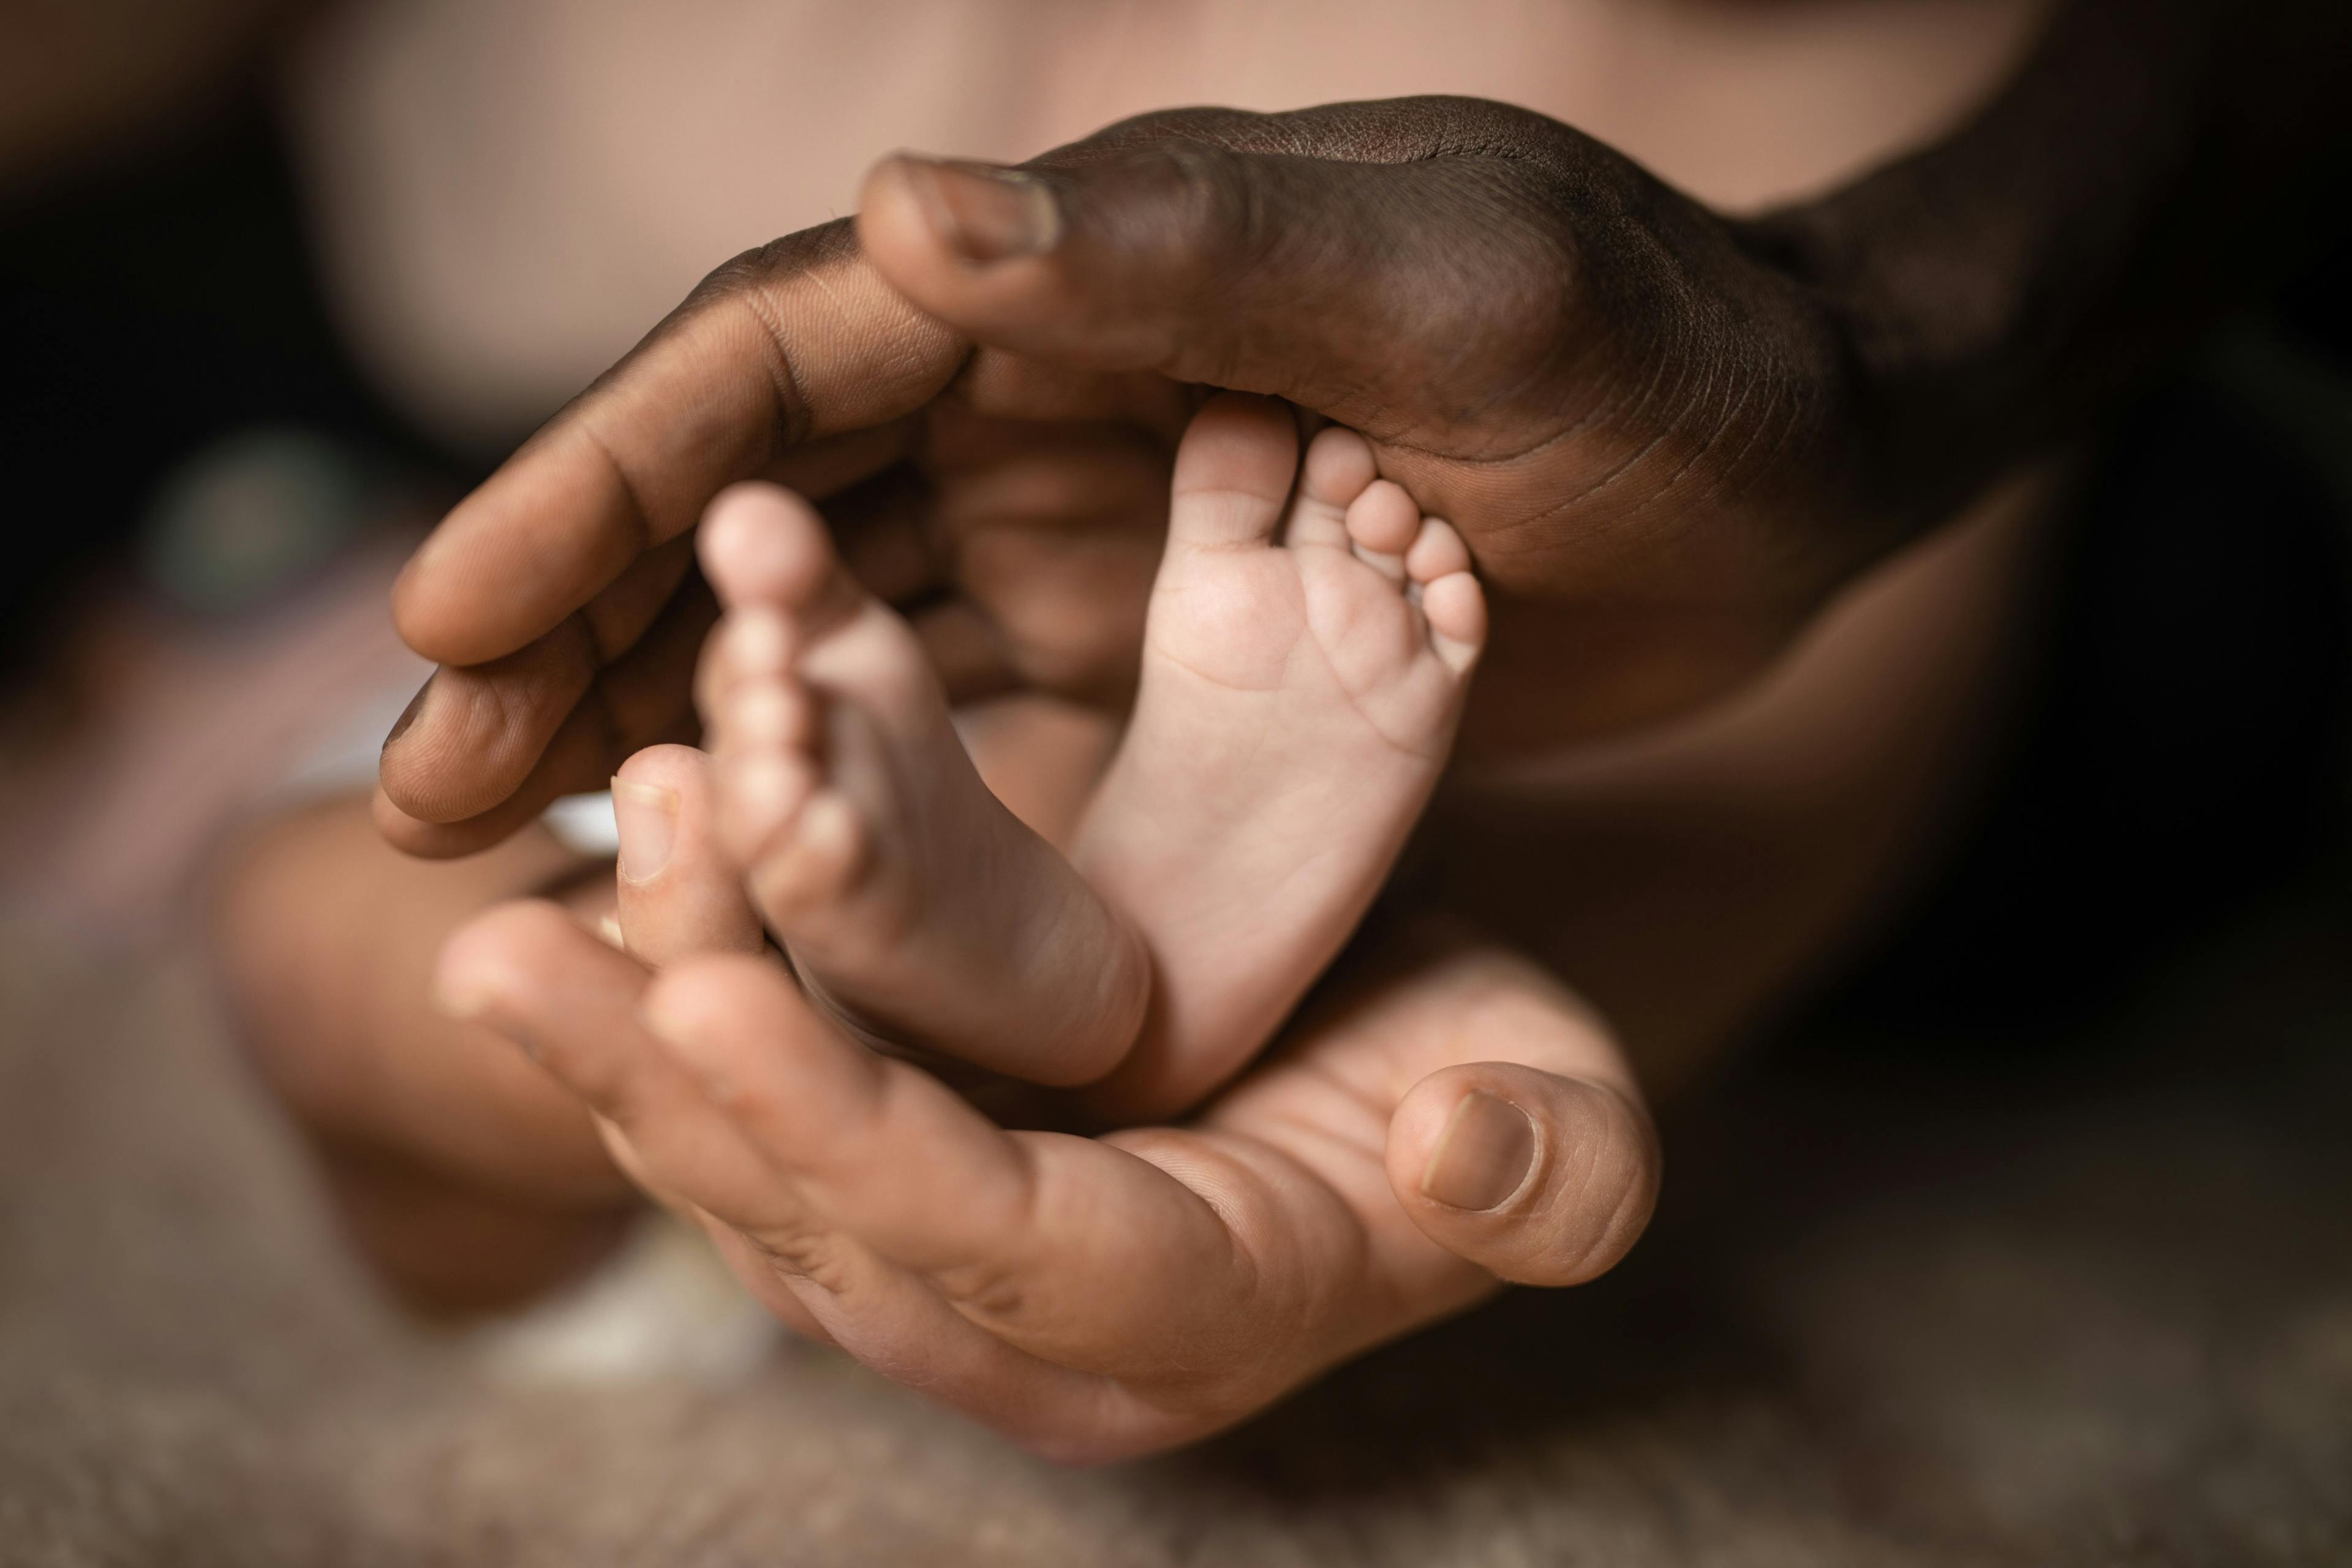 Interracial family holding baby feet in hands mixed by black and white skin color | Image credit: Shotmedia - stock.adobe.com